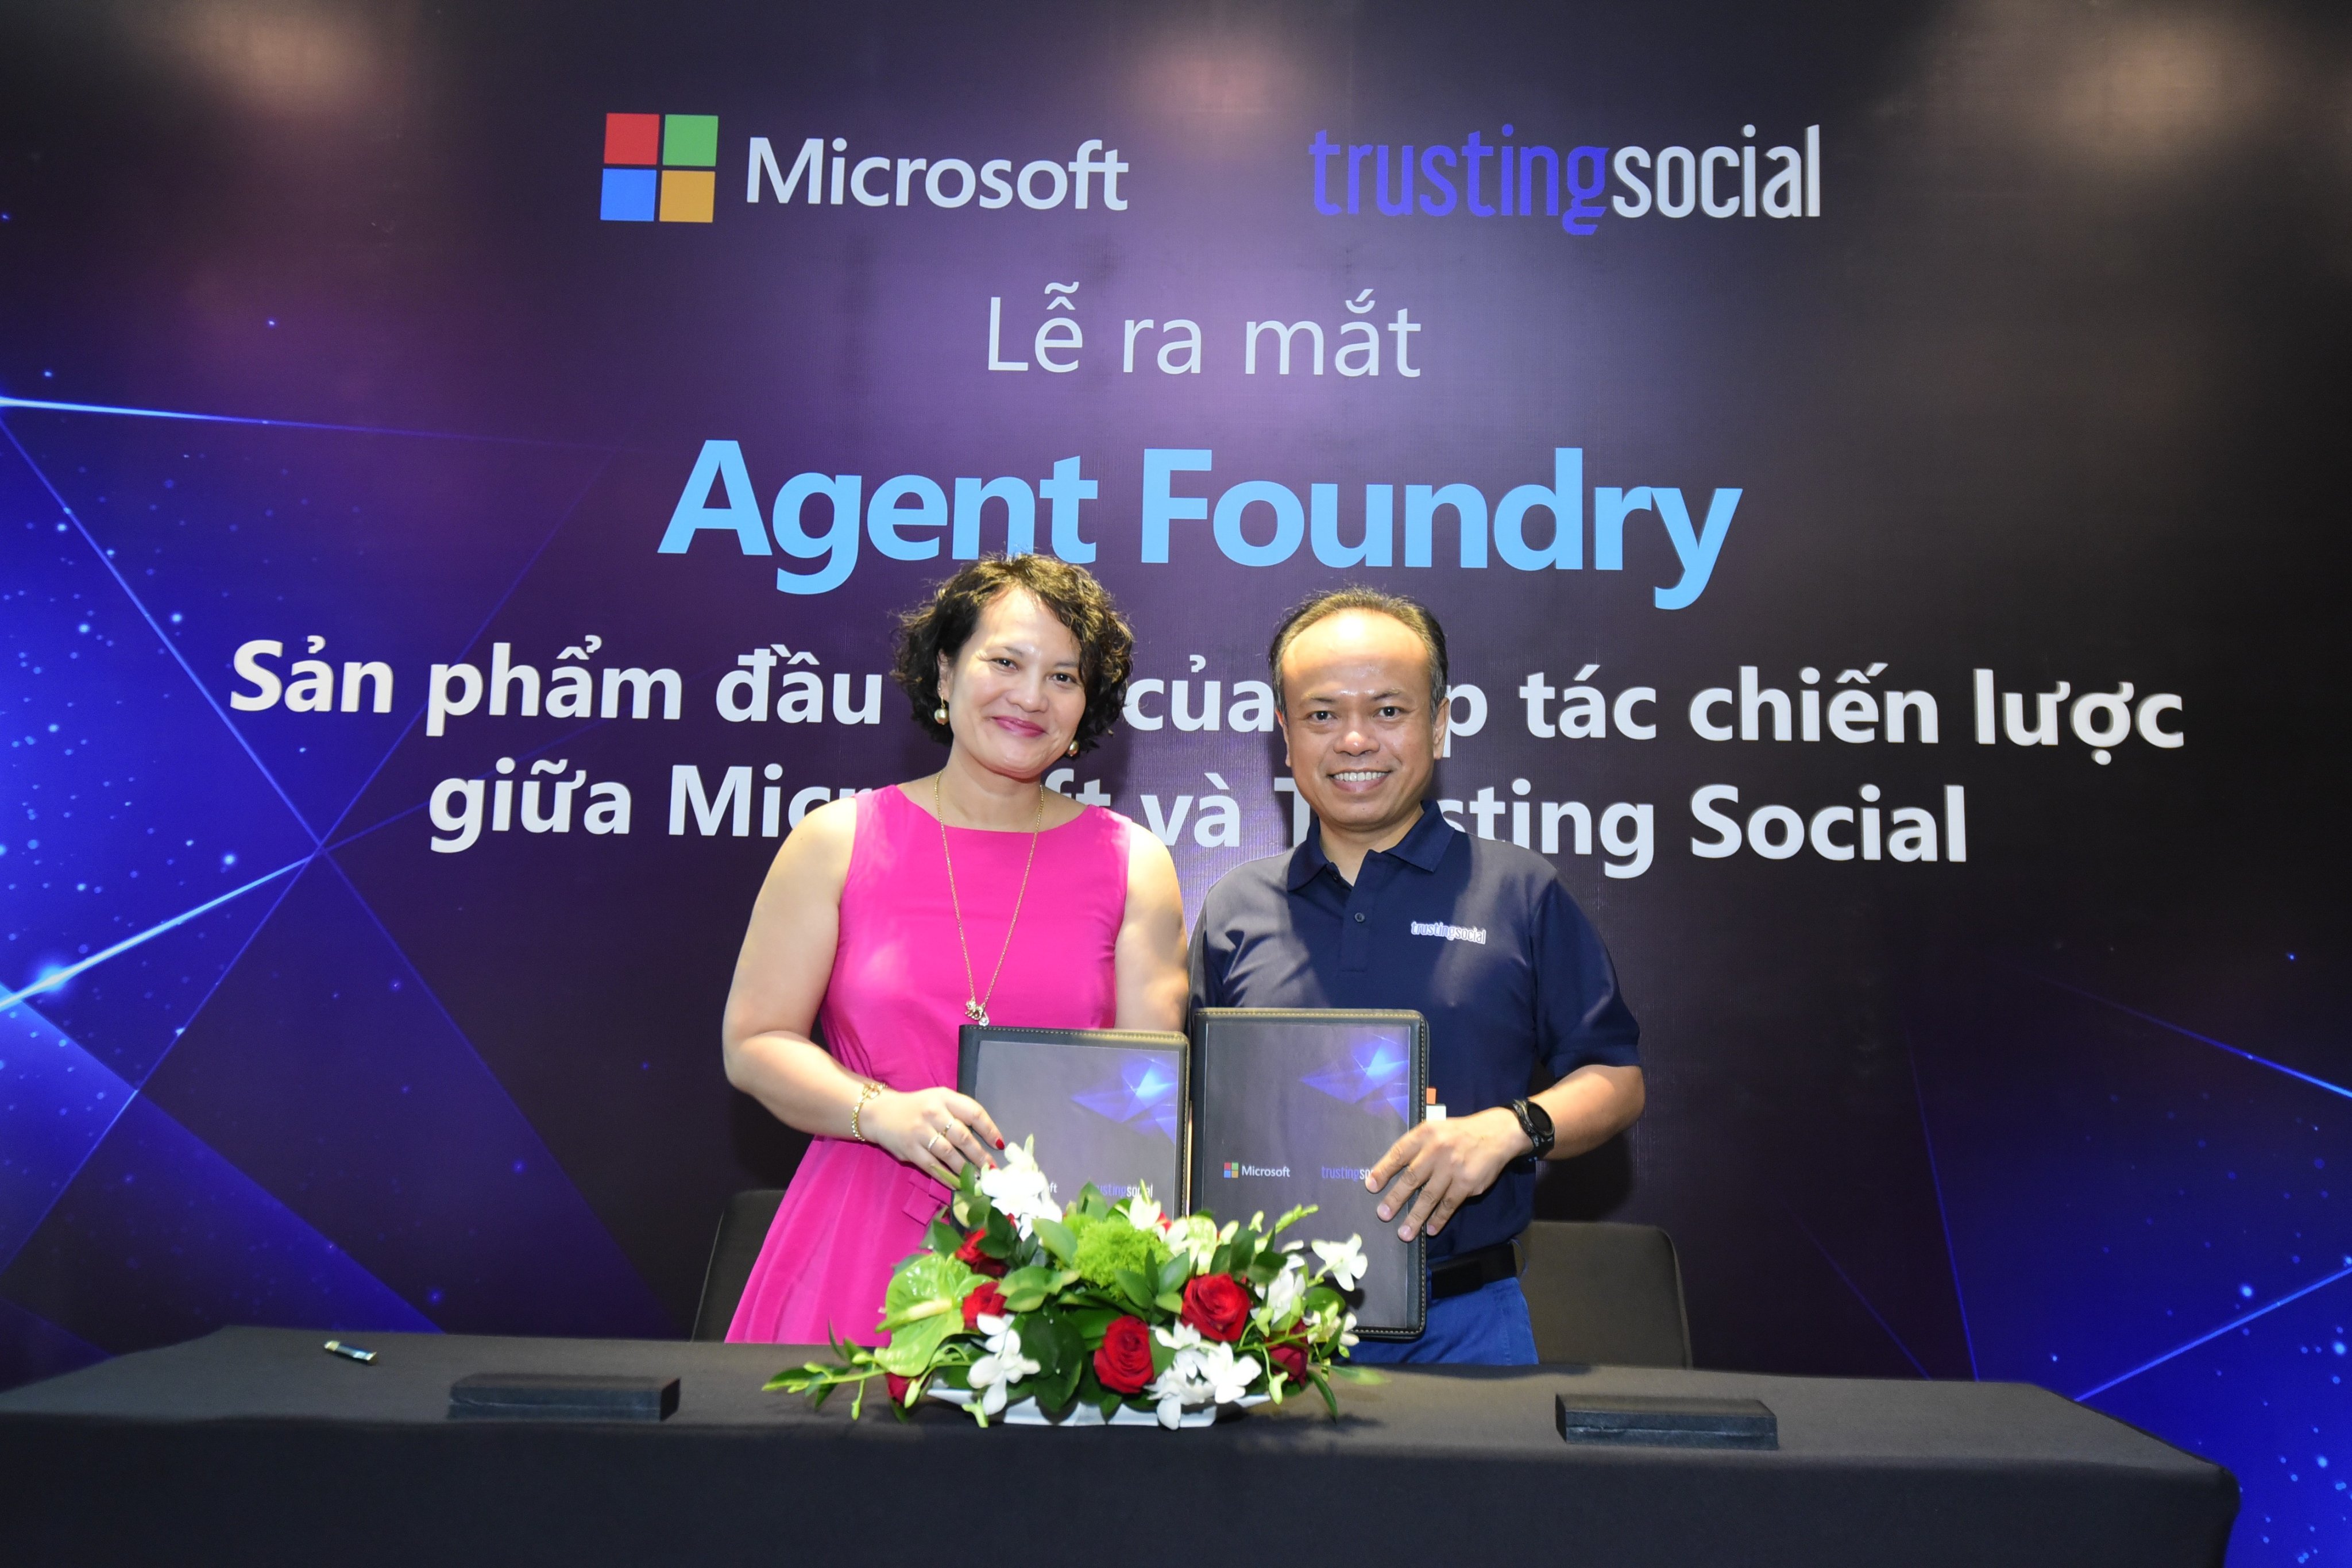 Trusting Social brings AI-powered agents to enterprises, backed by Microsoft Cloud, AI technologies